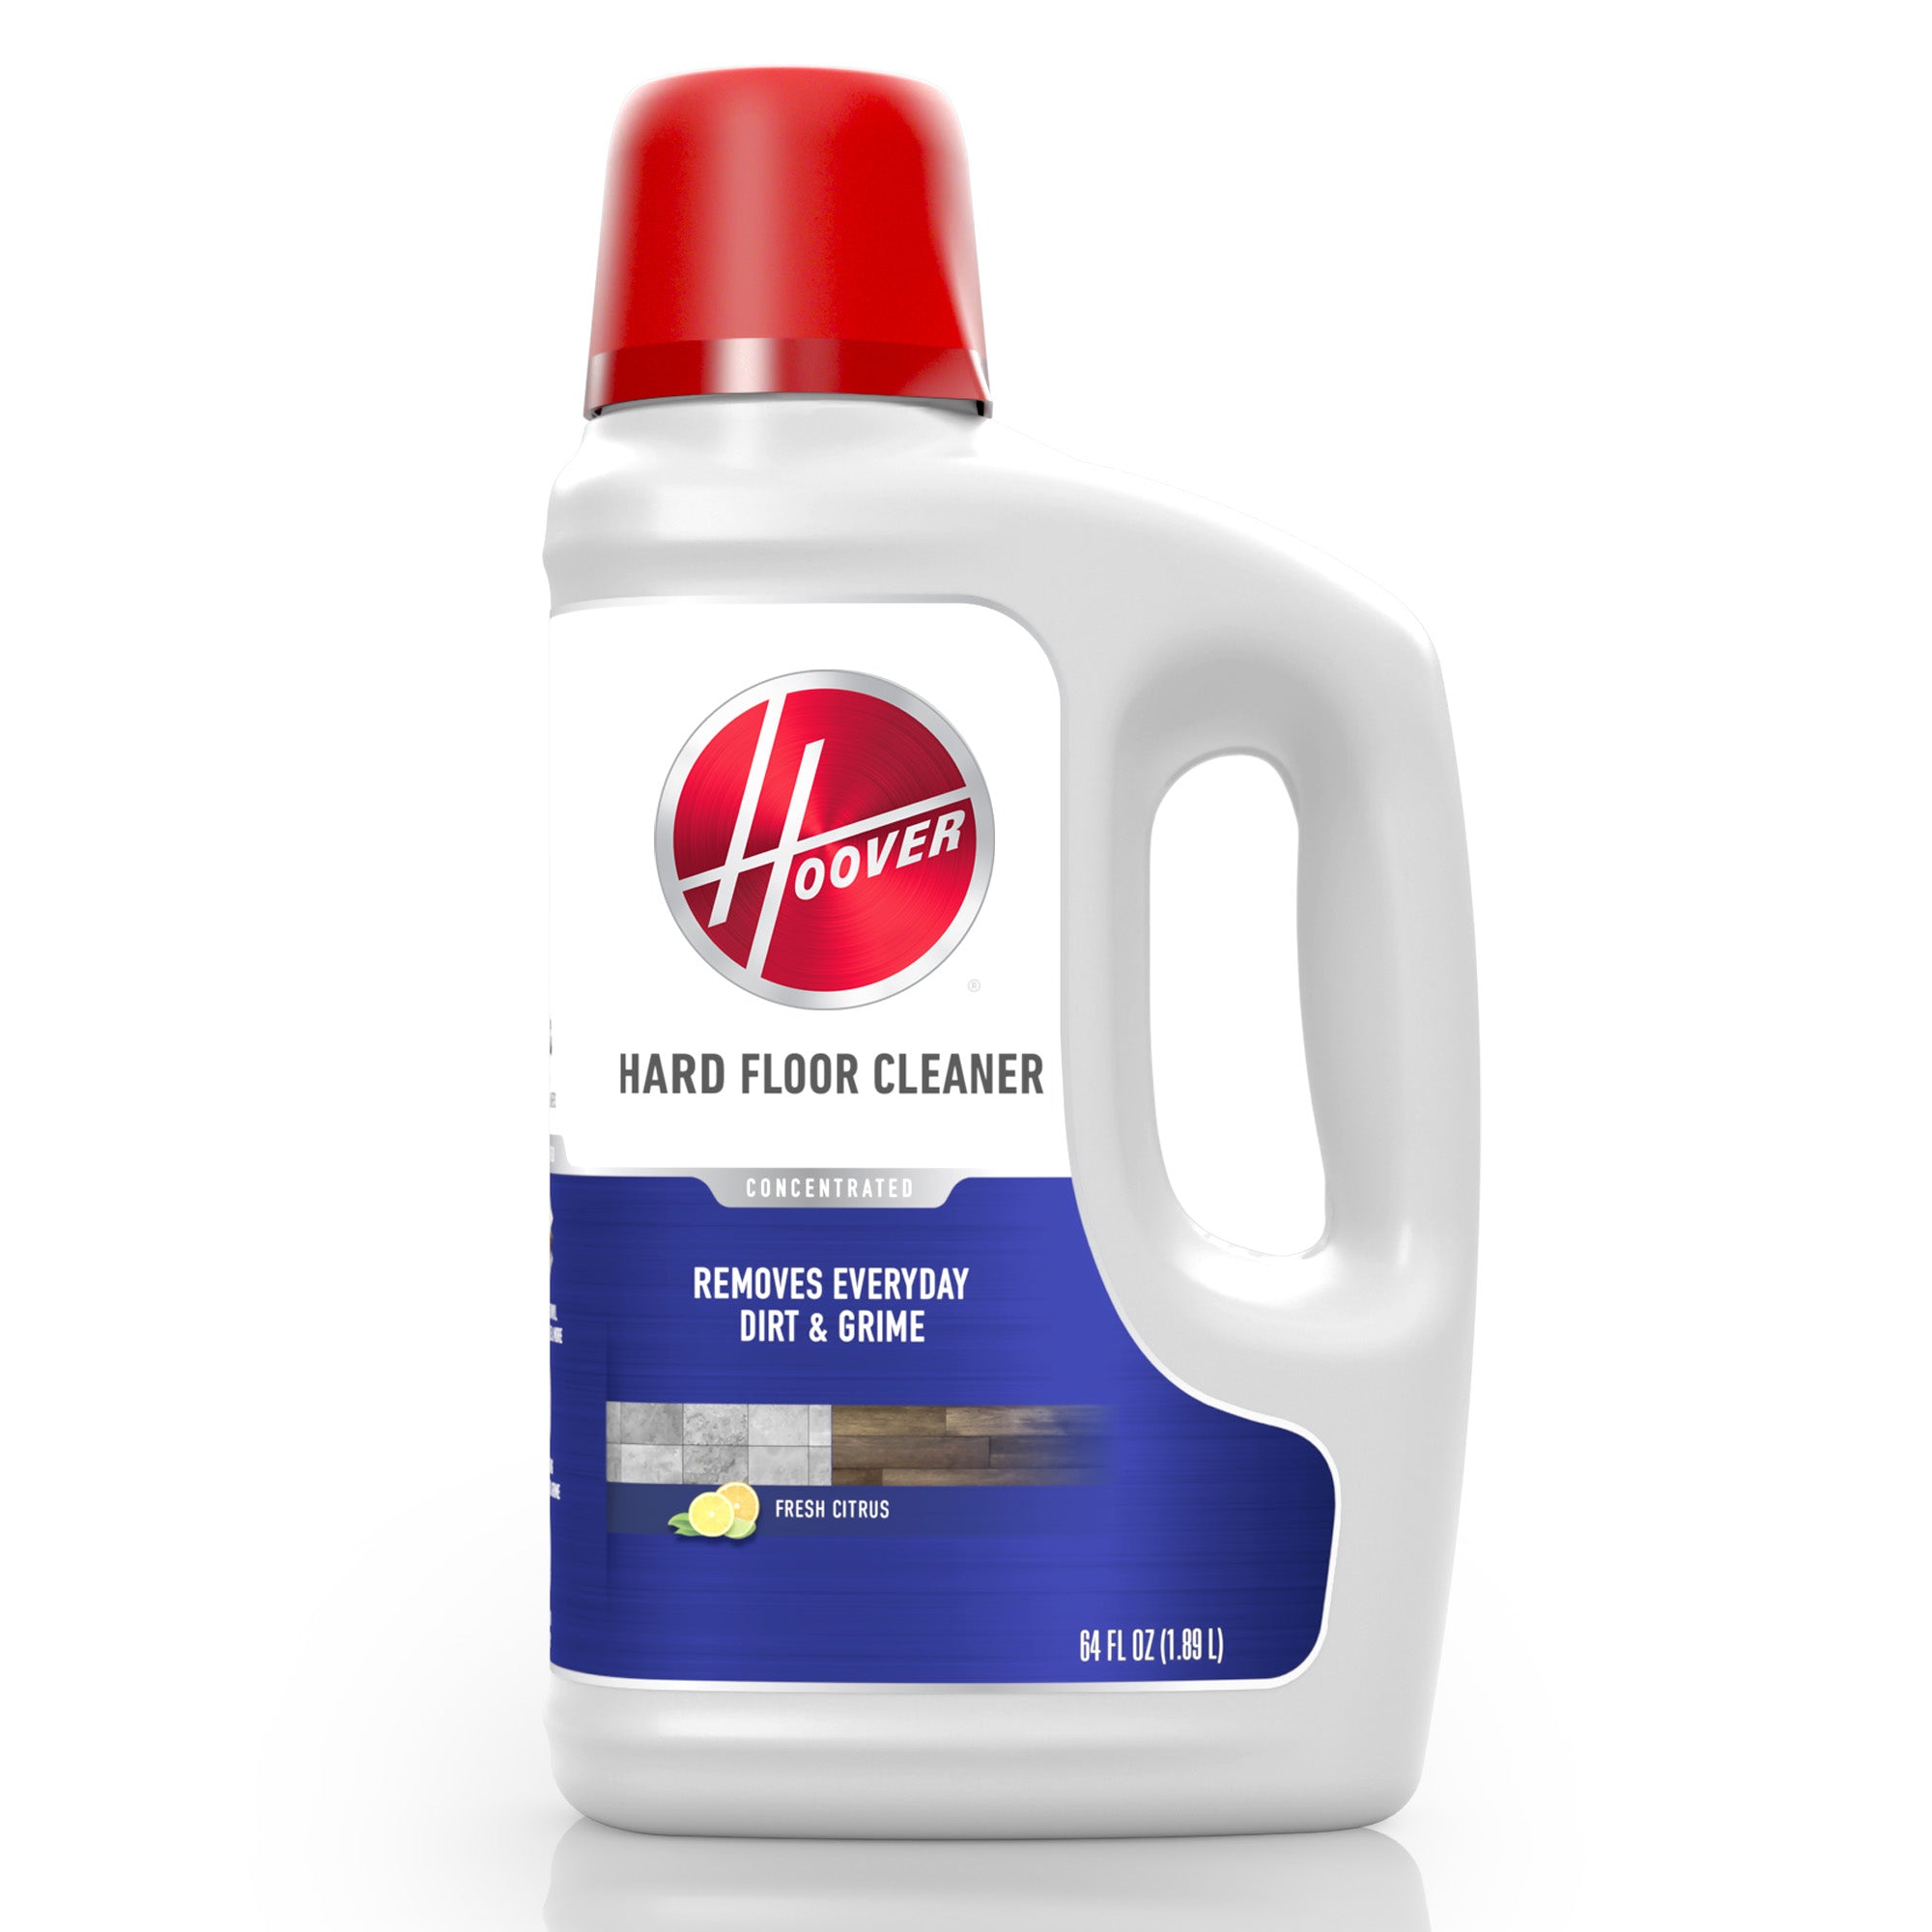 Clean Can Everyday Surface Cleaner